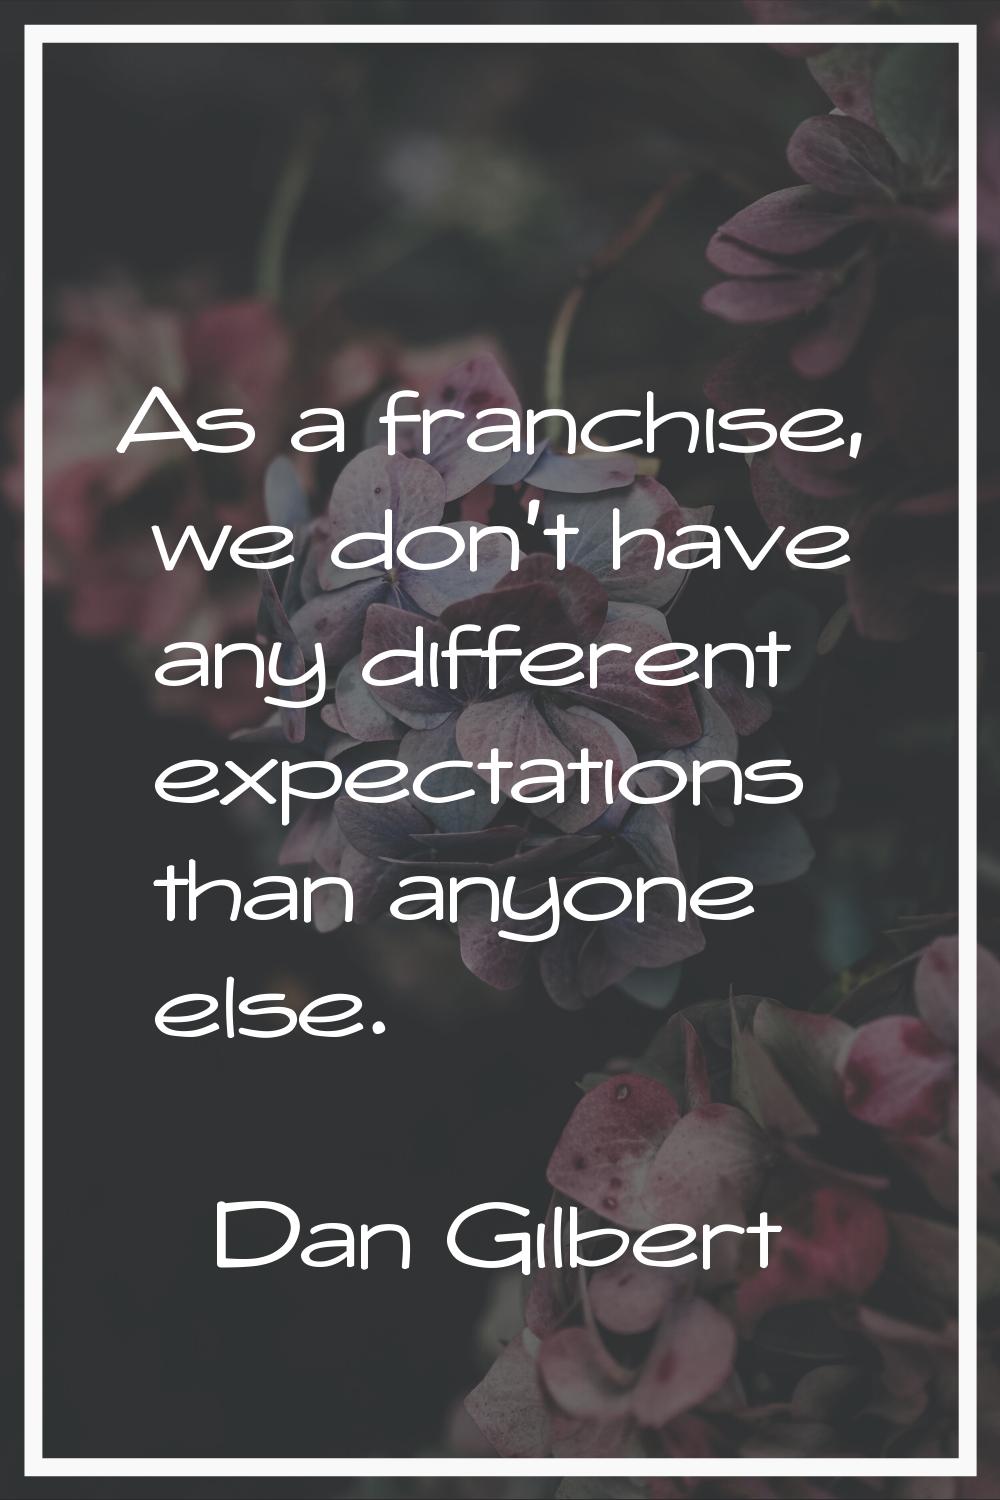 As a franchise, we don't have any different expectations than anyone else.